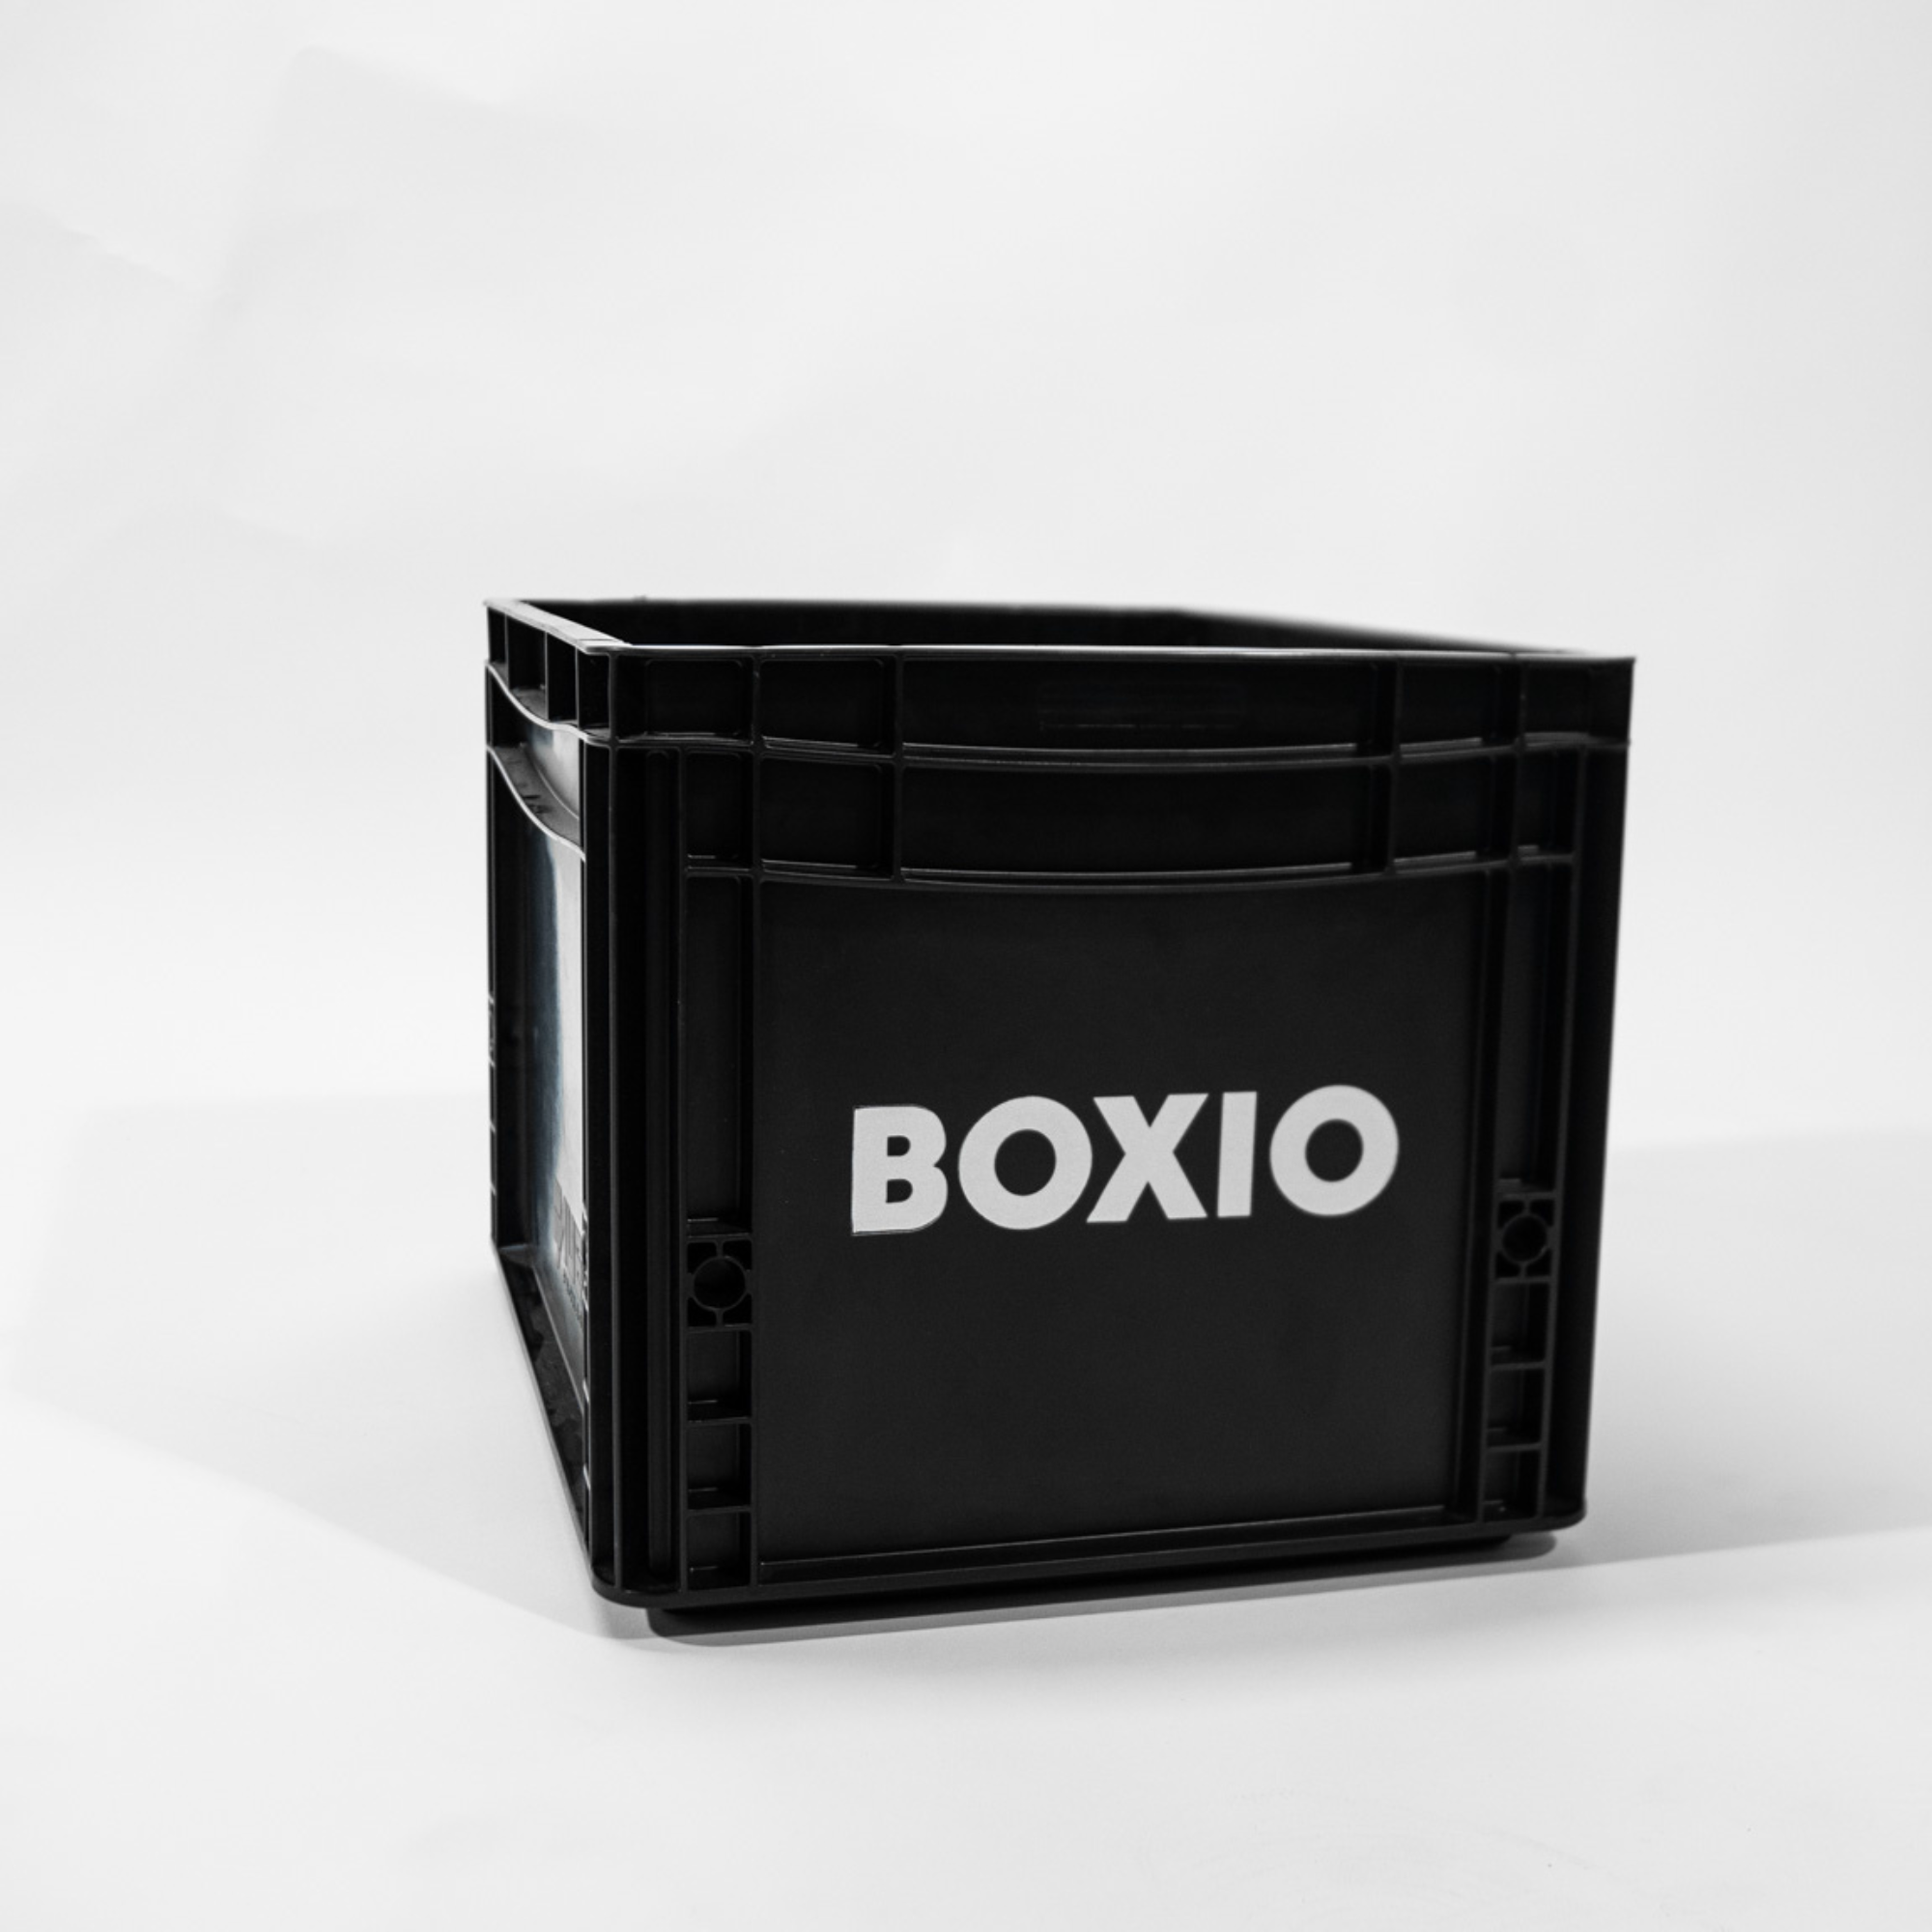 BOXIO Toilet UP: Booster Seat for Separating Toilet - Includes Hemp Litter  and Practical Shaker - 15.7 x 11.8 x 4.7 cm